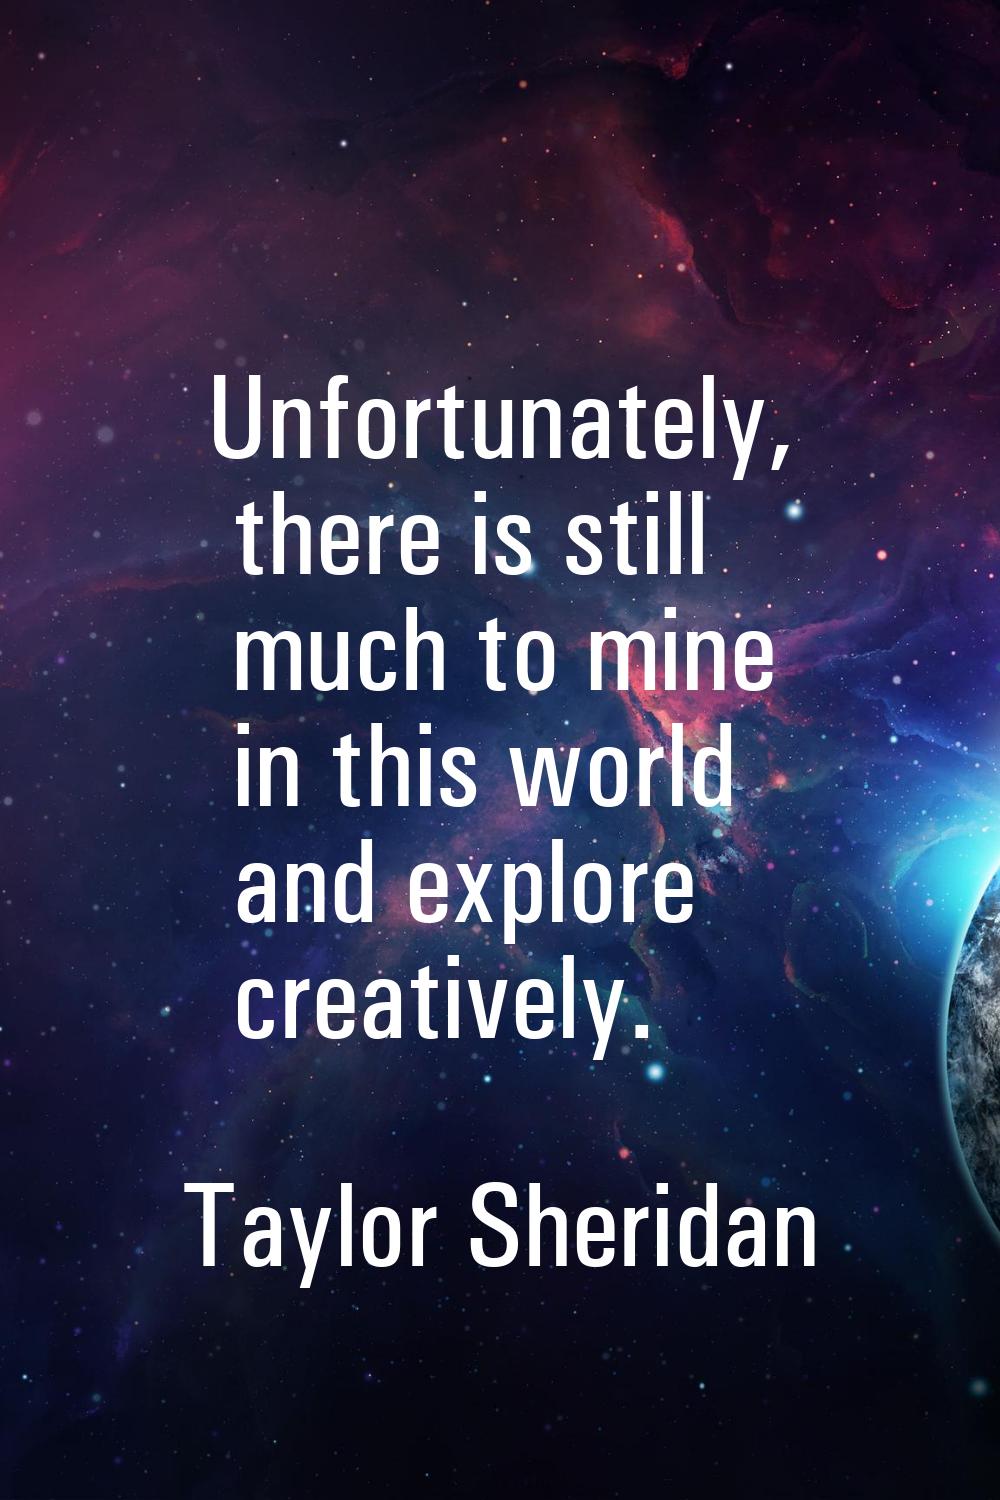 Unfortunately, there is still much to mine in this world and explore creatively.